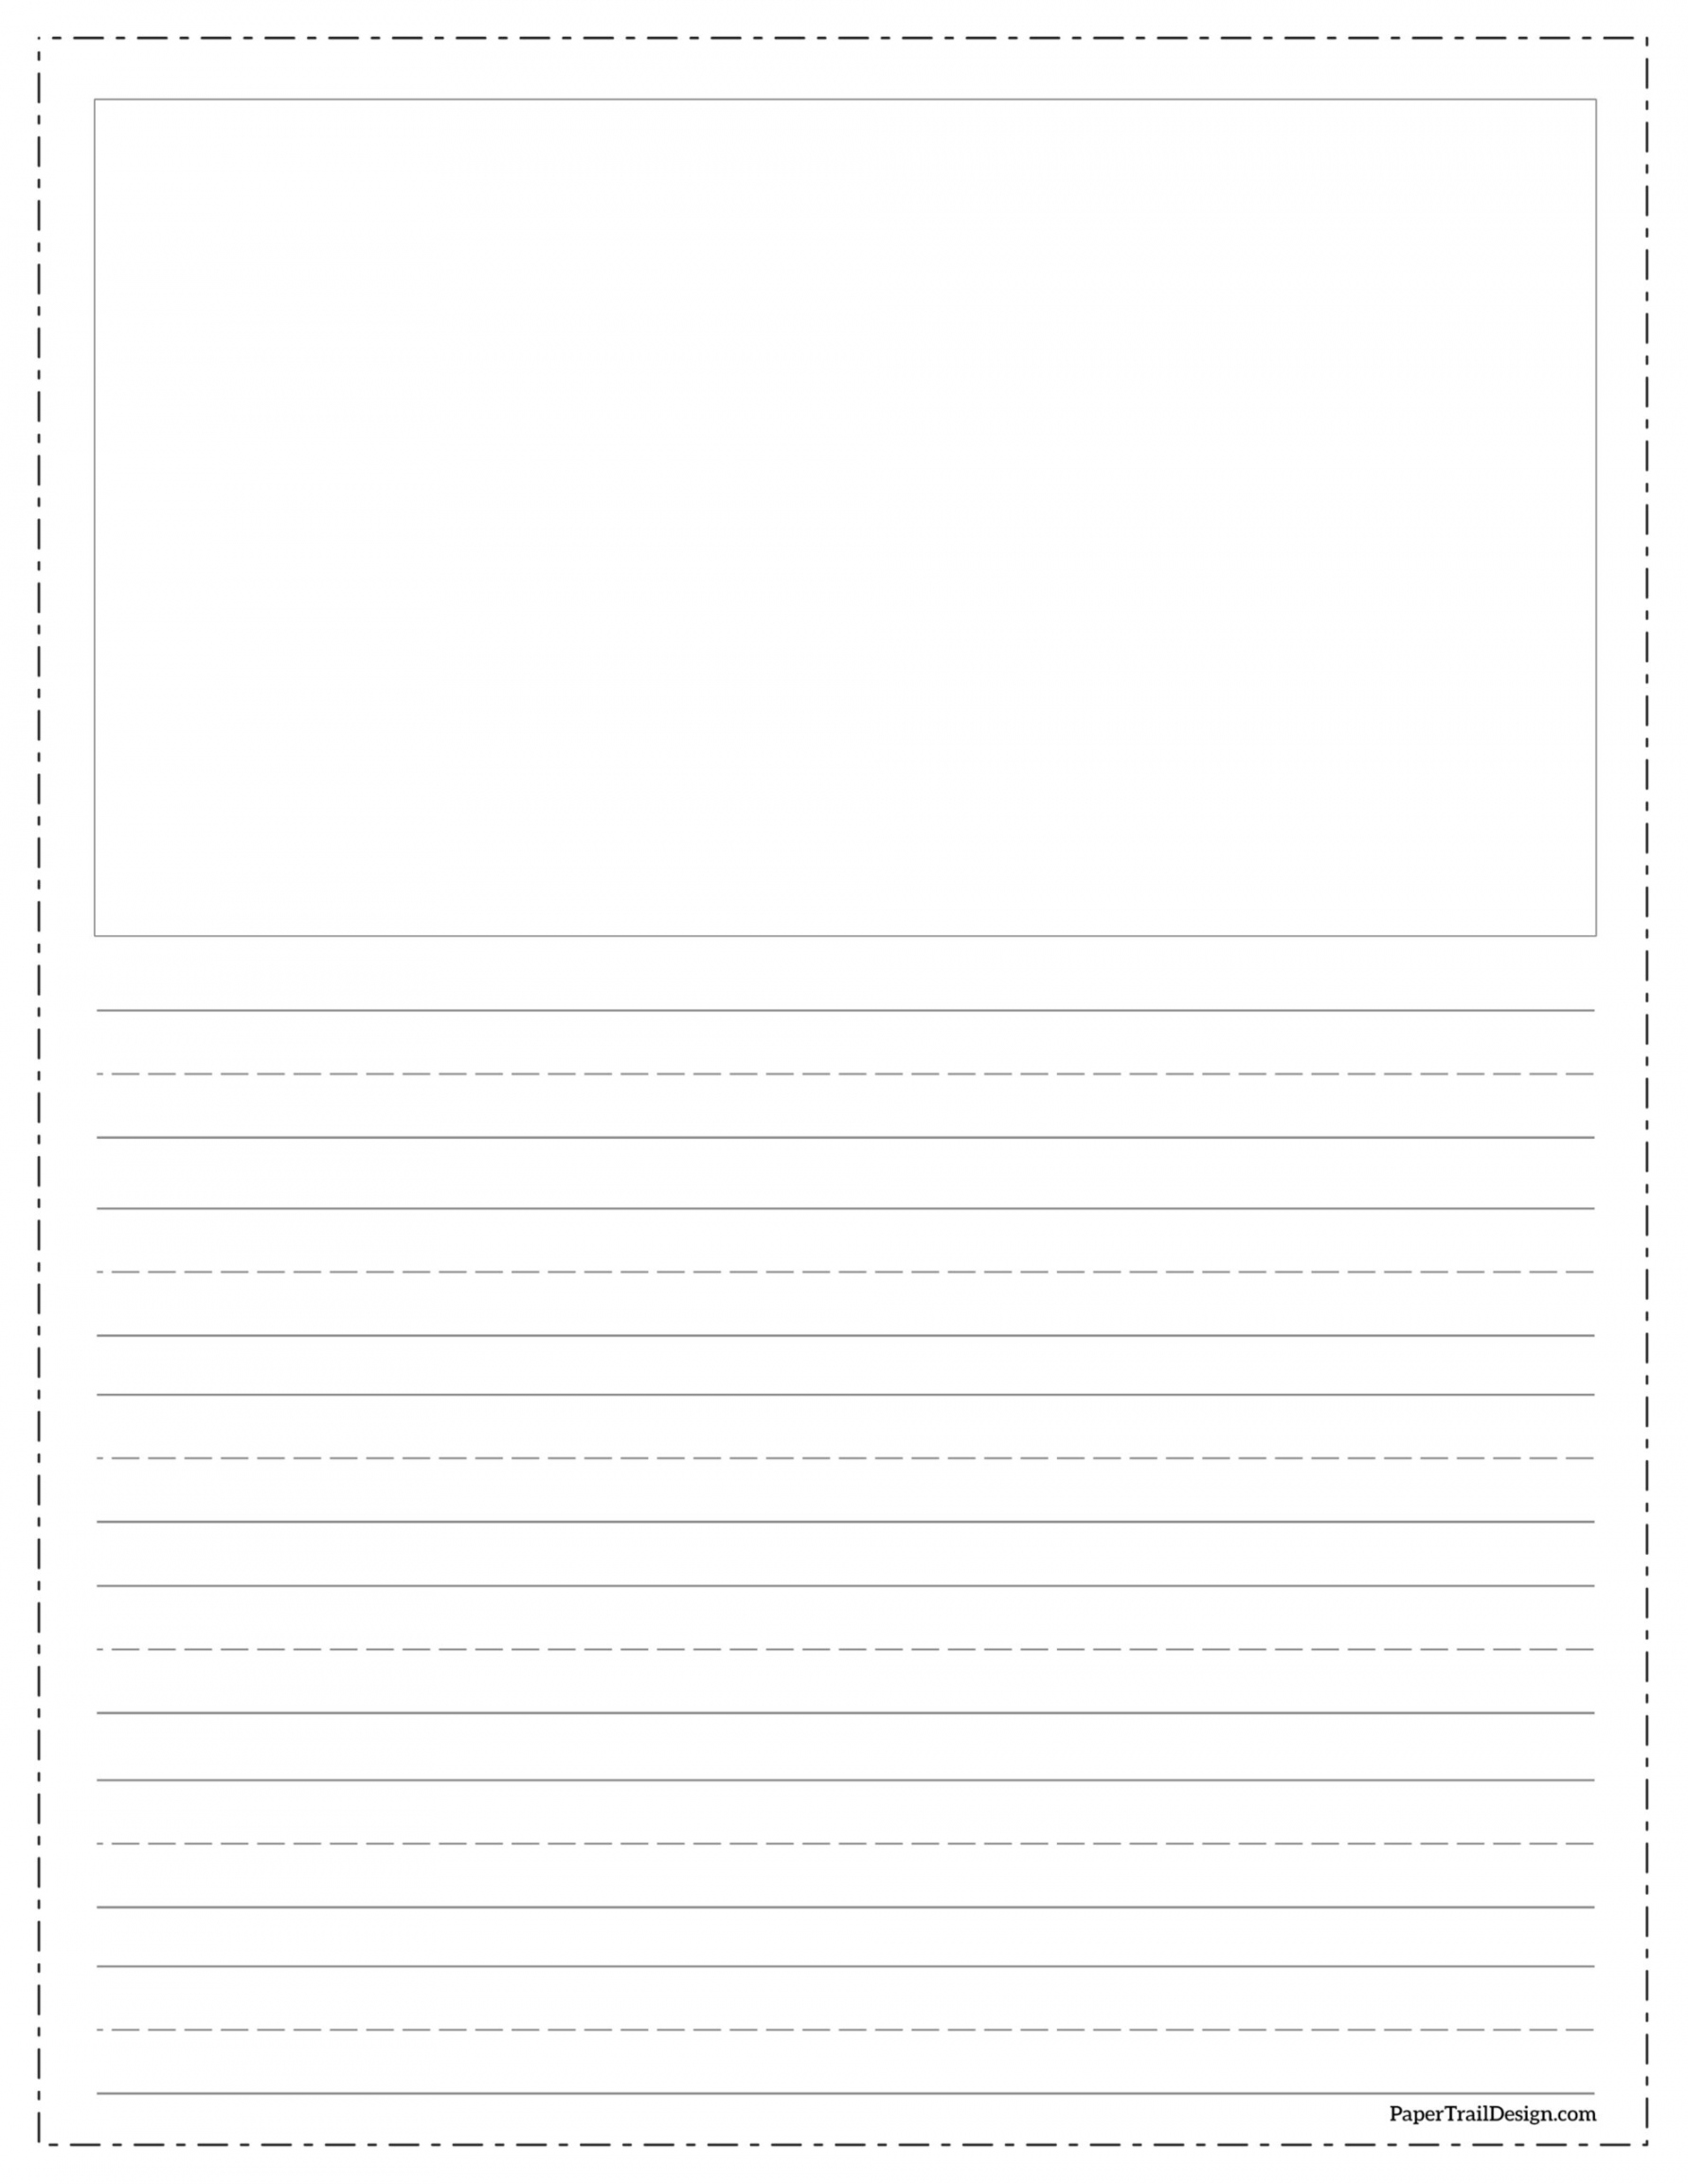 Free Printable Lined Writing Paper with Drawing Box - Paper Trail  - FREE Printables - Free Printable Lined Paper With Picture Box